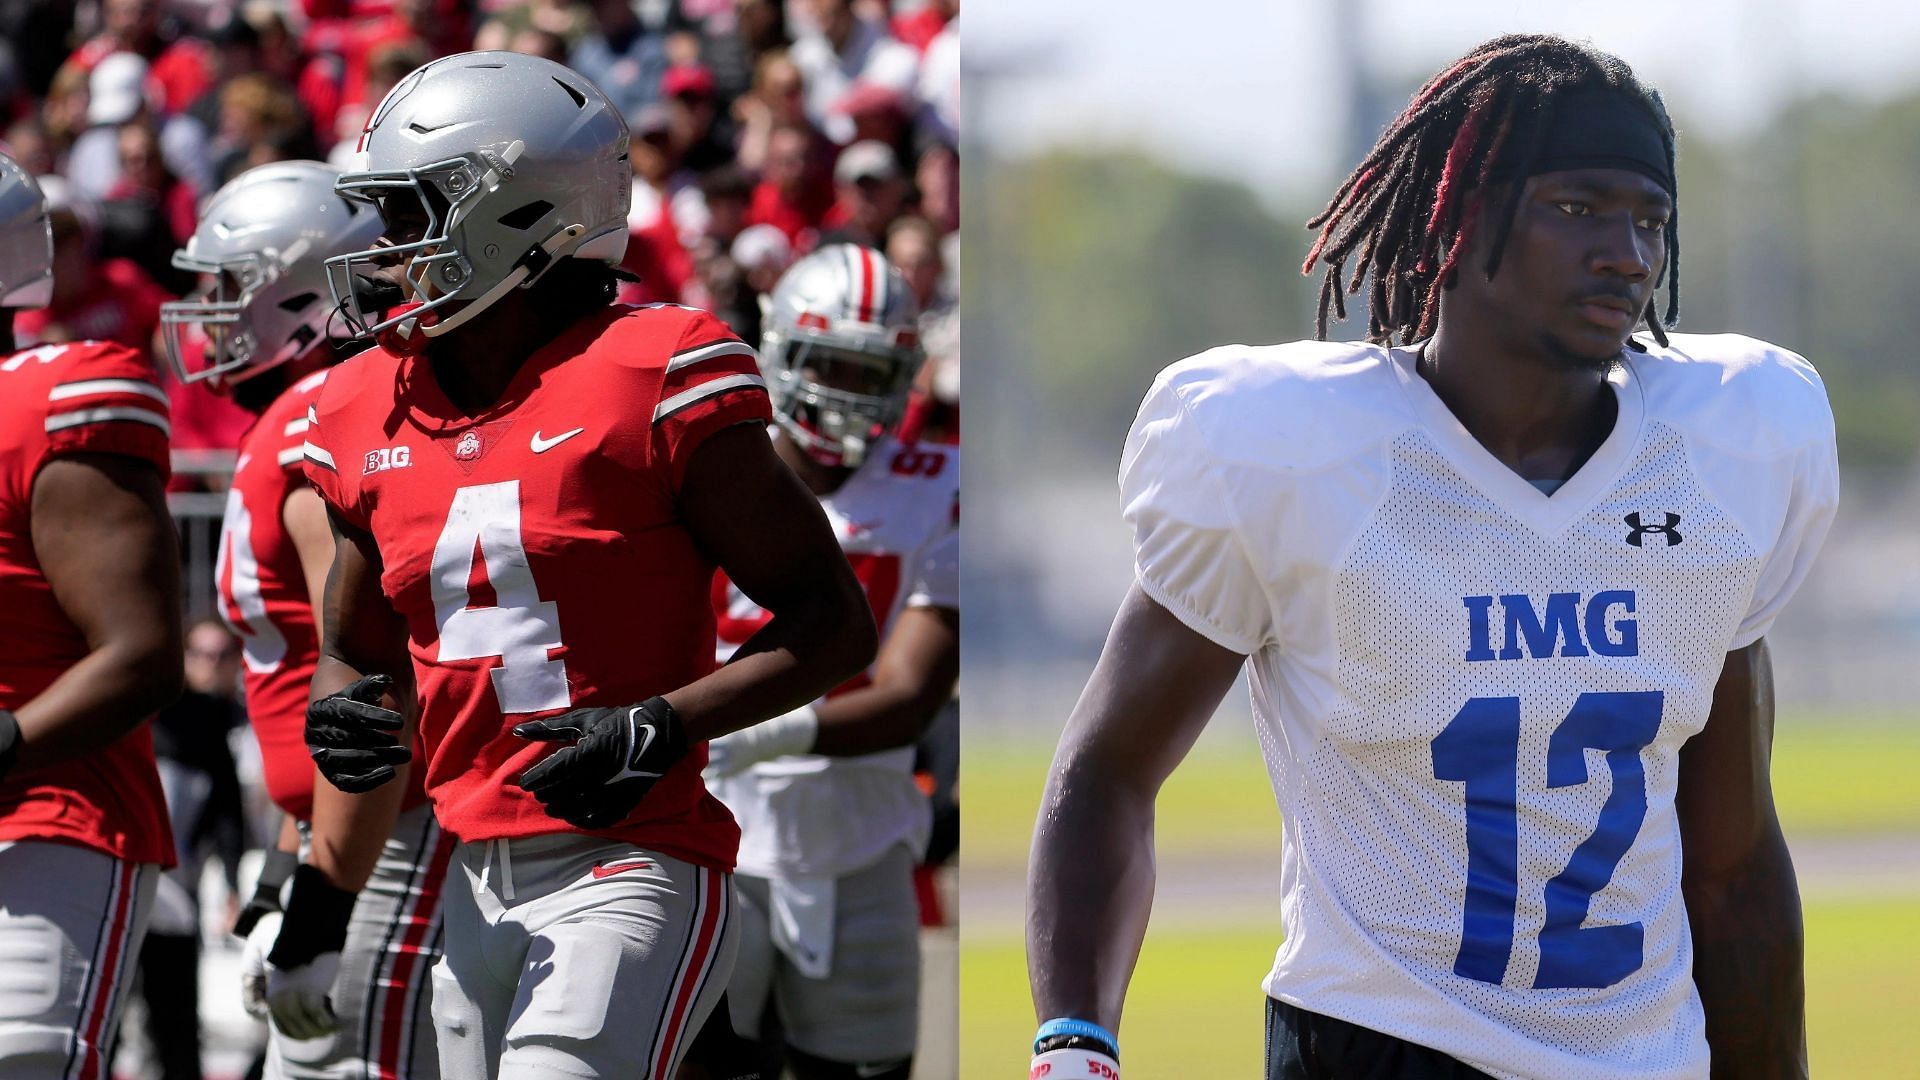 Jeremiah Smith and Ellis Robinson IV are among the top incoming college football freshman who could make an impact this season